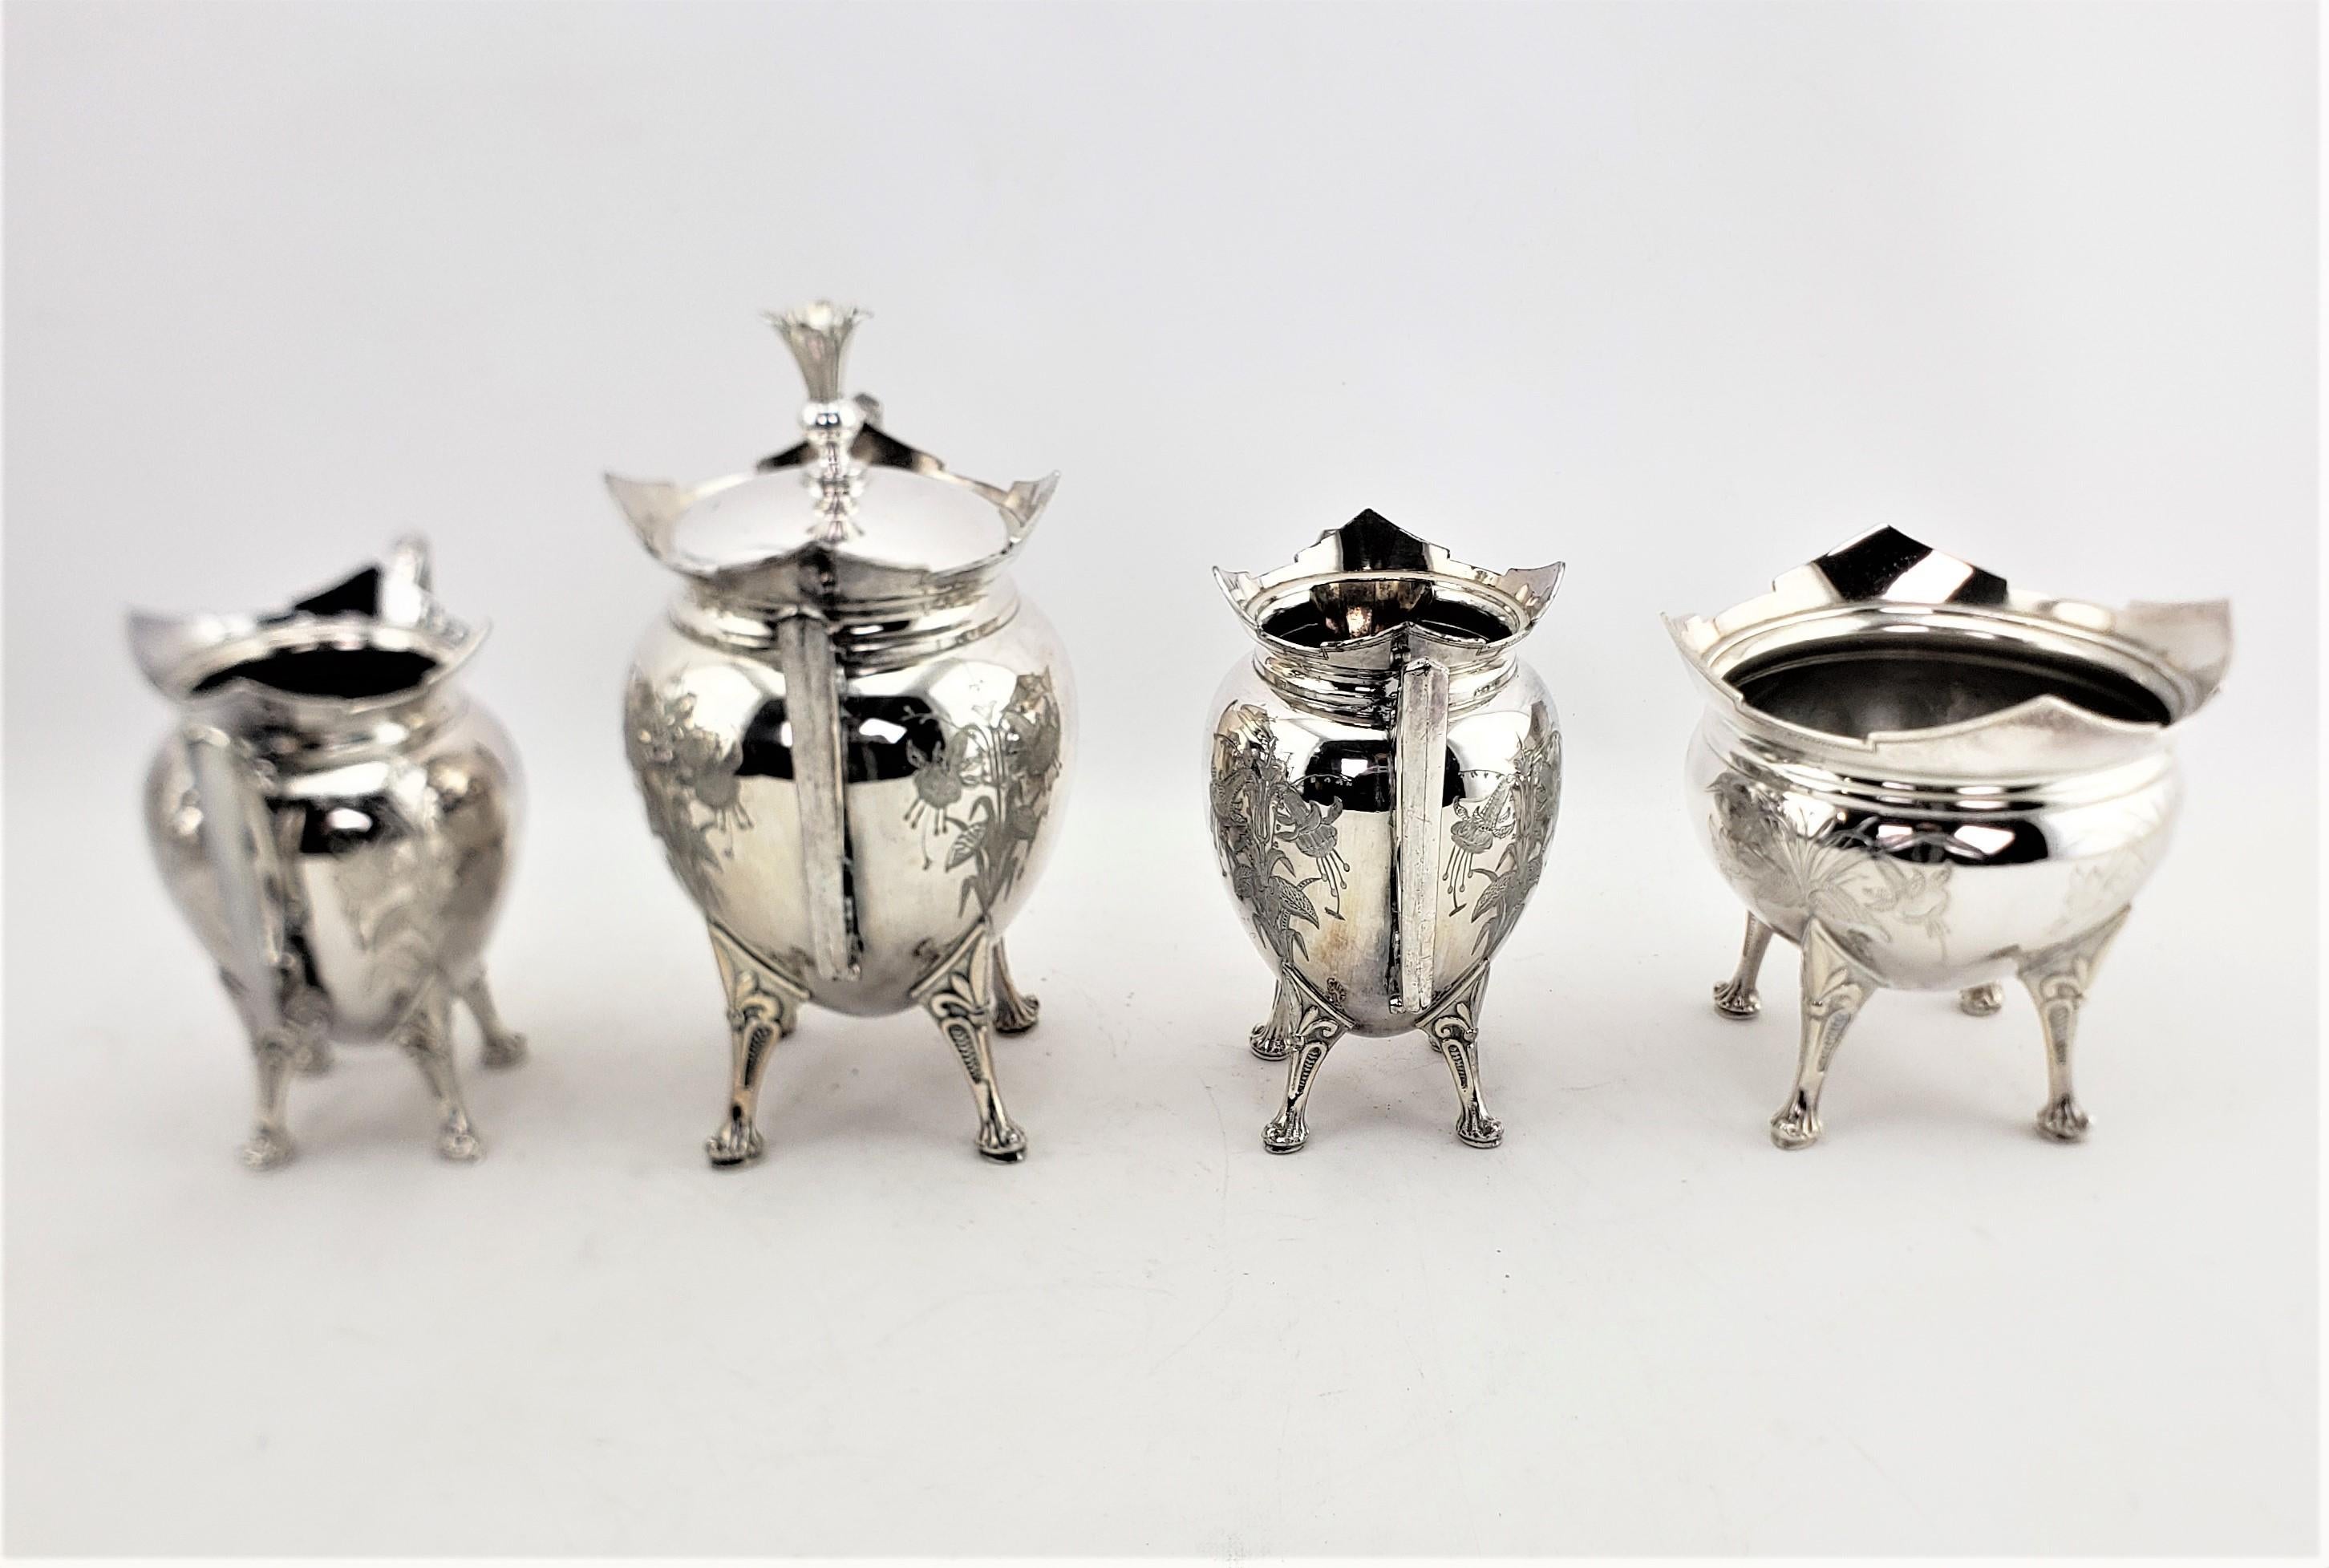 Antique Aesthetic Movement 7 Piece Silver Plated Tea Set with Floral Decoration For Sale 6